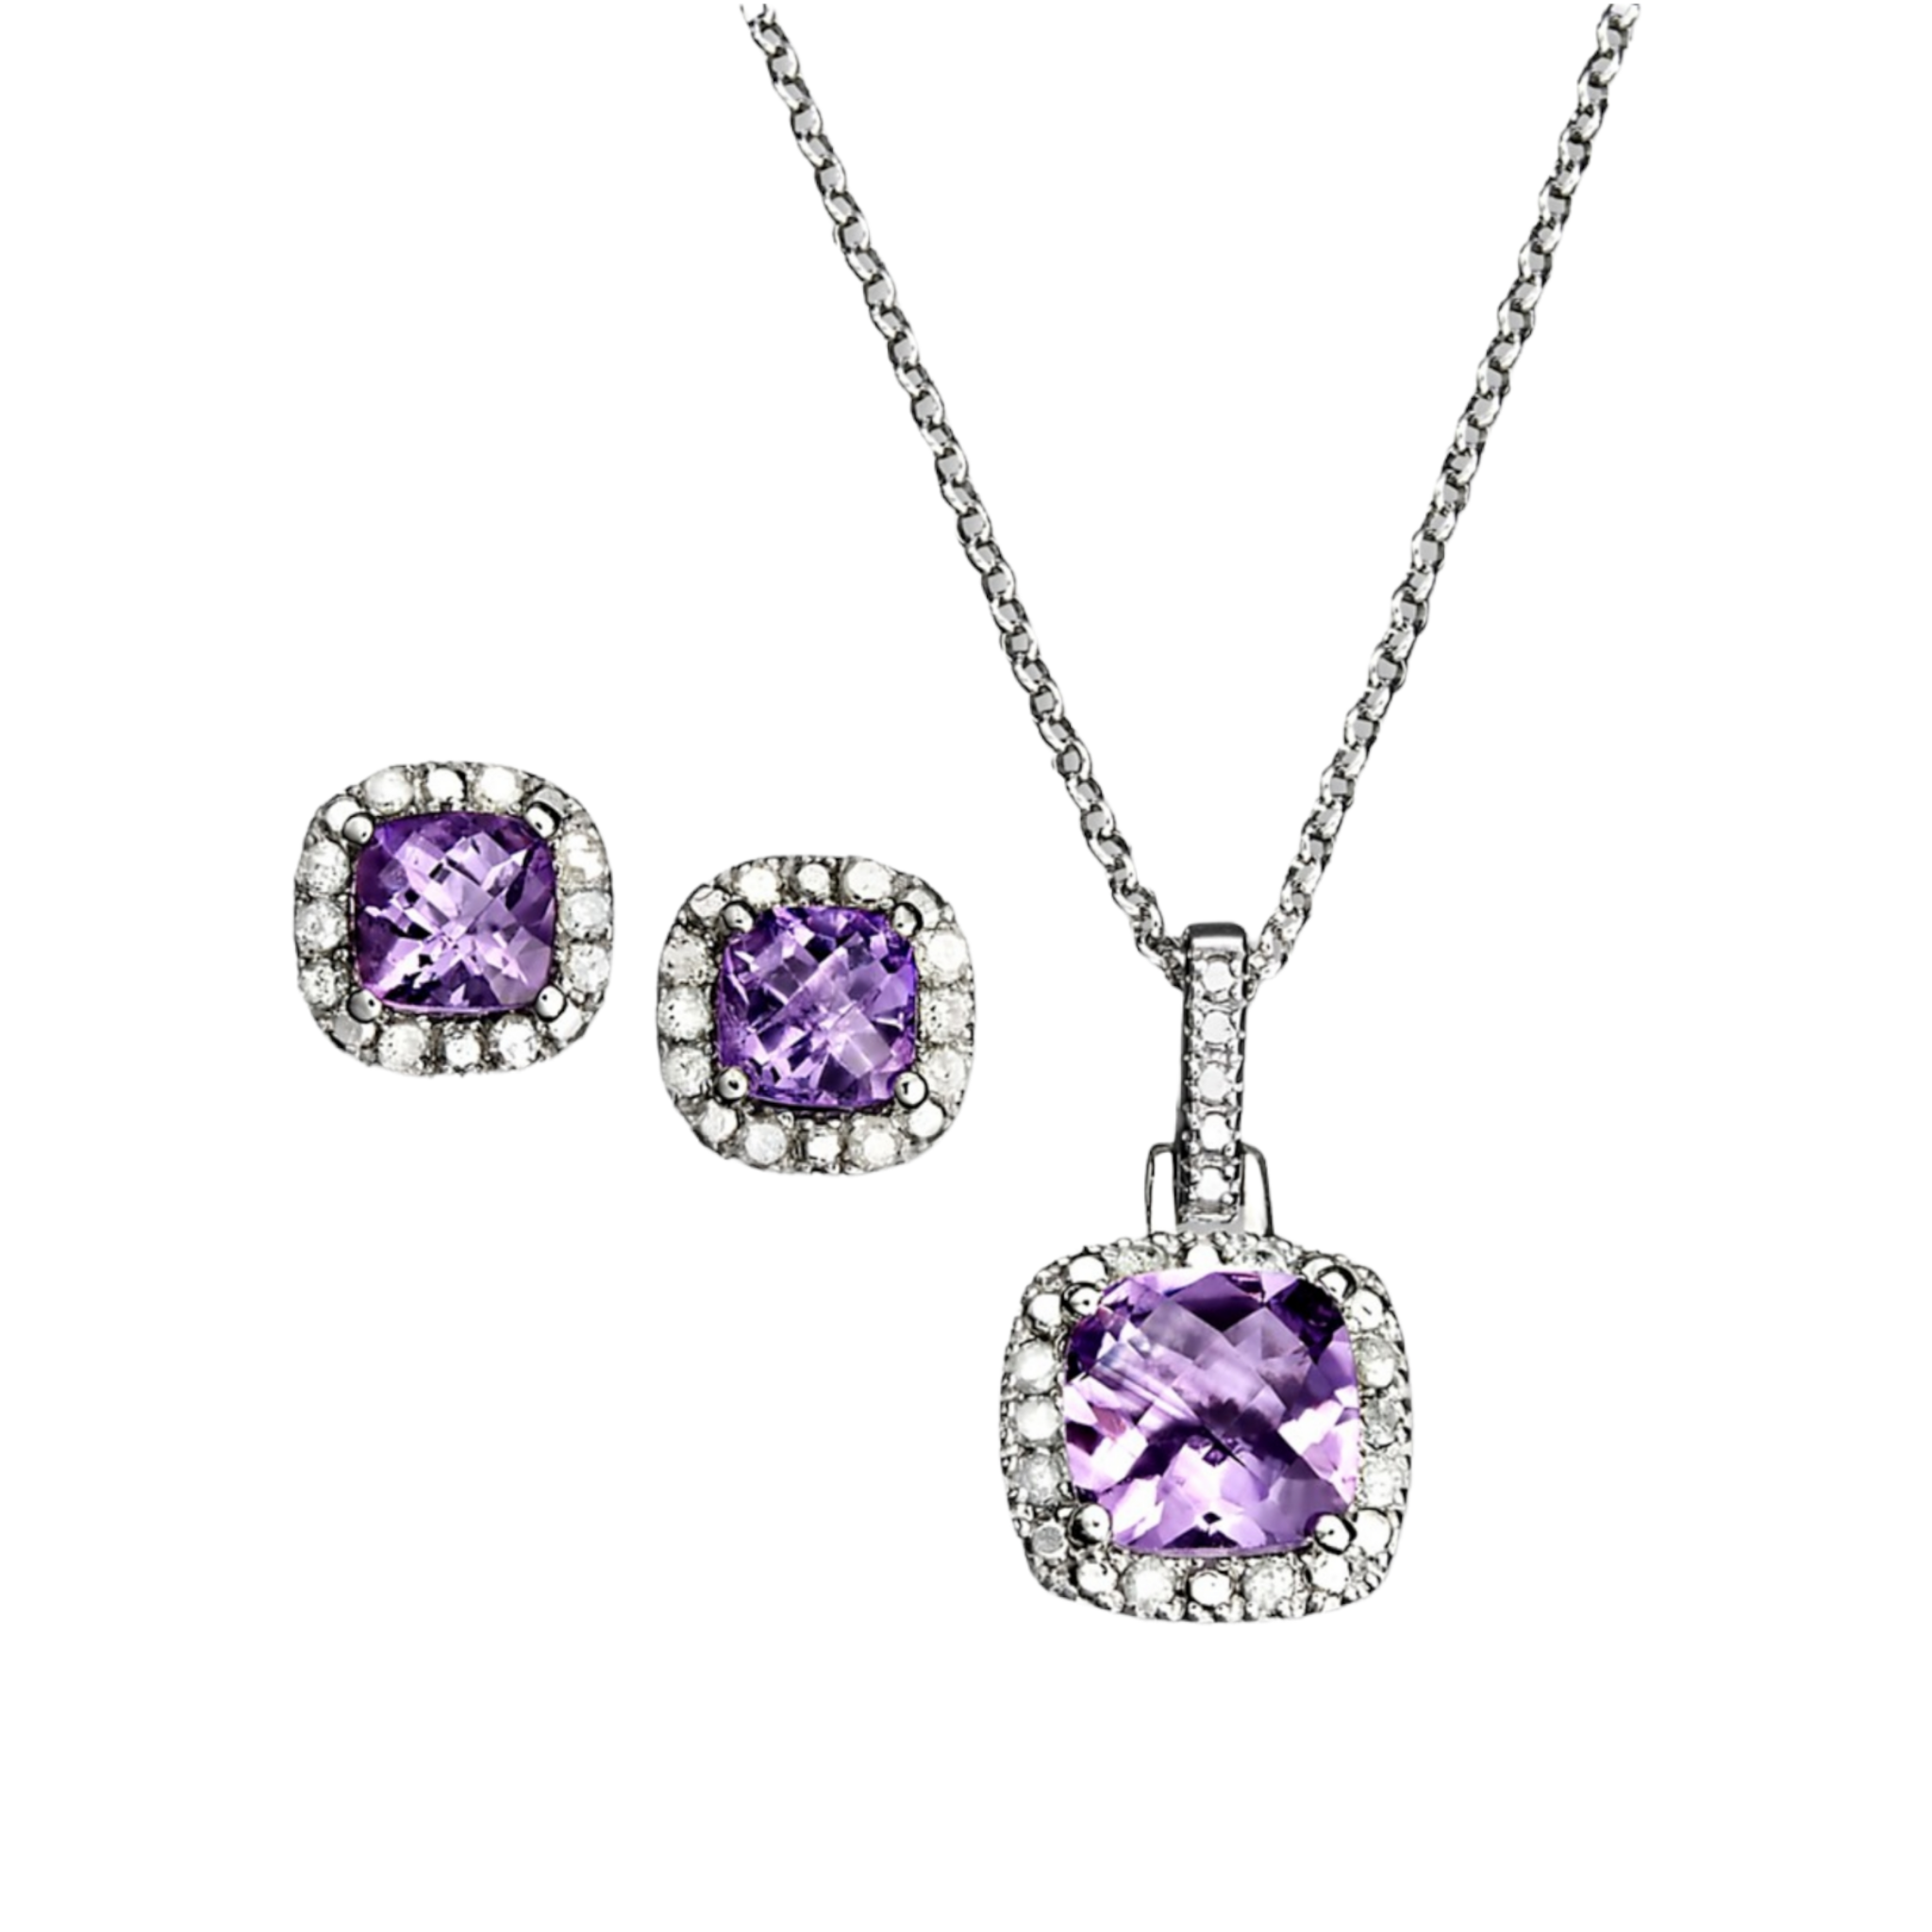 Giani Bernini 2-pc. Set Cubic Zirconia Cross Pendant Necklace & Matching Stud Earrings in Sterling Silver, Created for Macy's - Sterling Silver